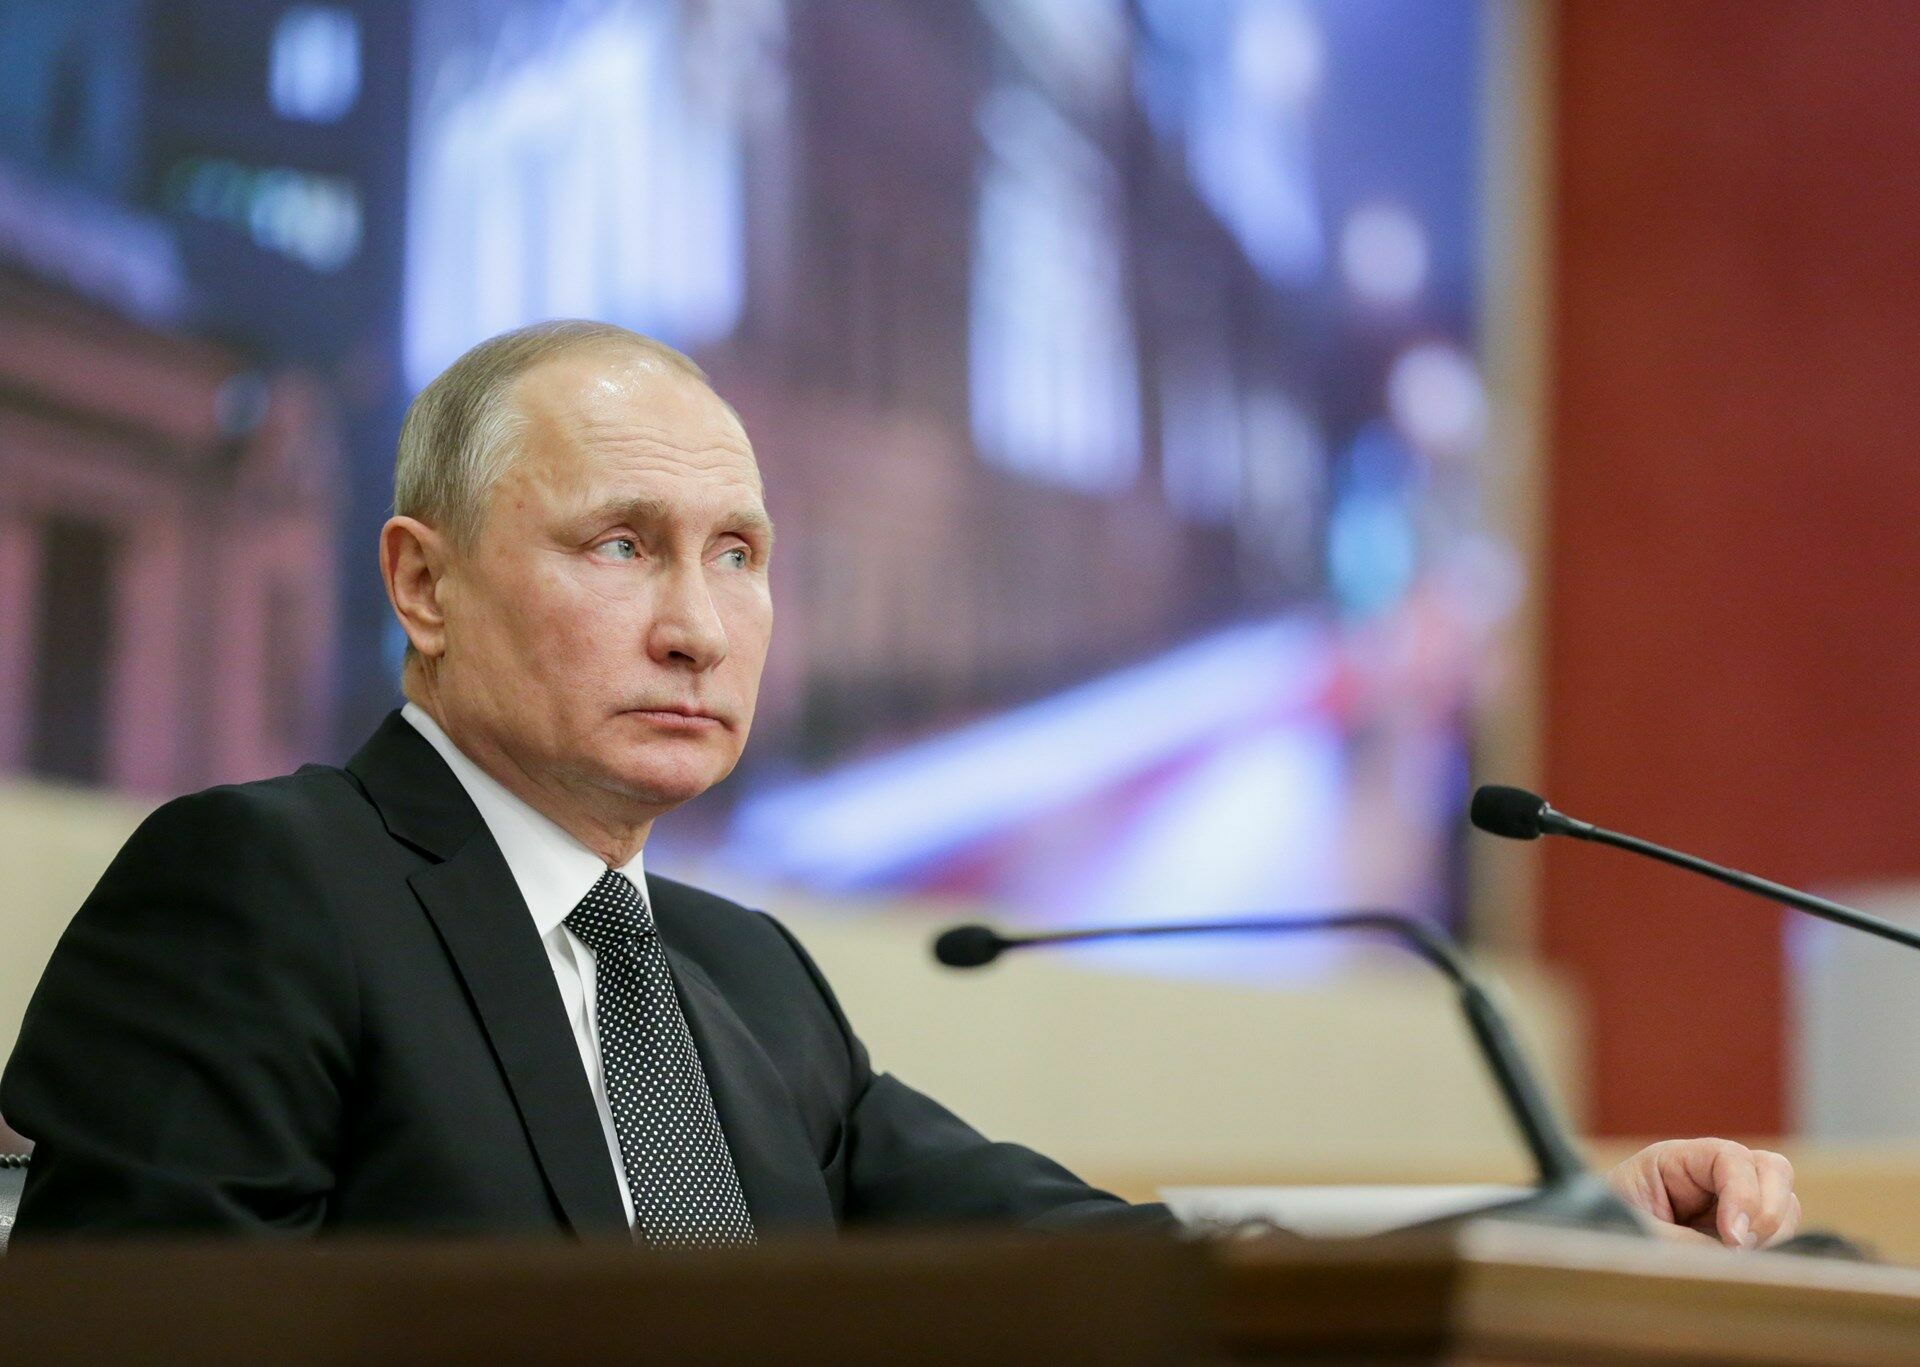 Putin dismissed three ministers and expanded the number of deputy prime ministers to 10